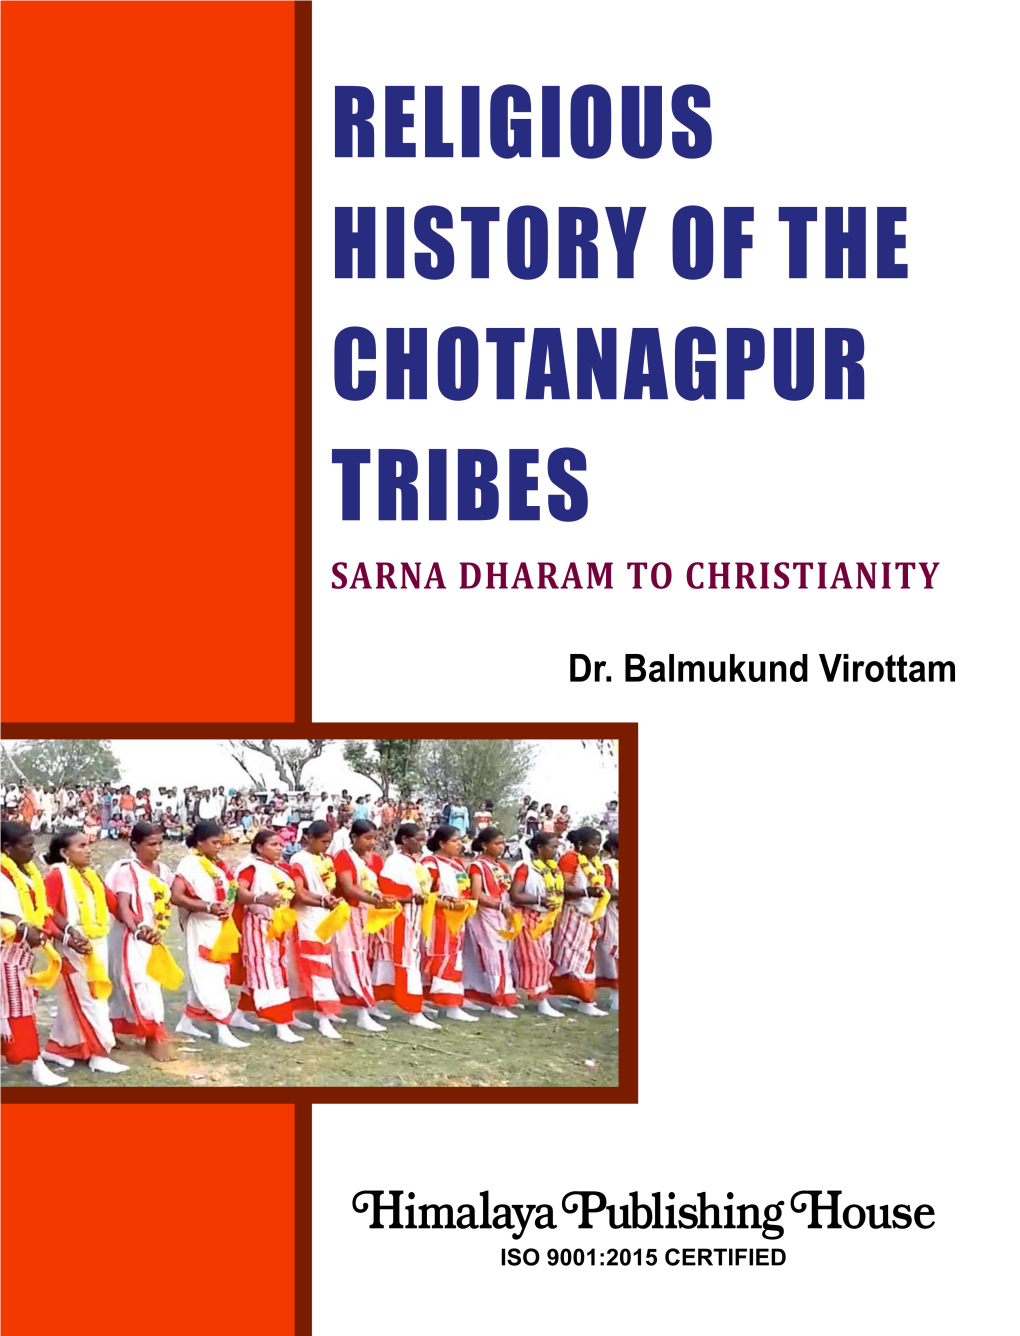 Religious History of the Chotanagpur Tribes